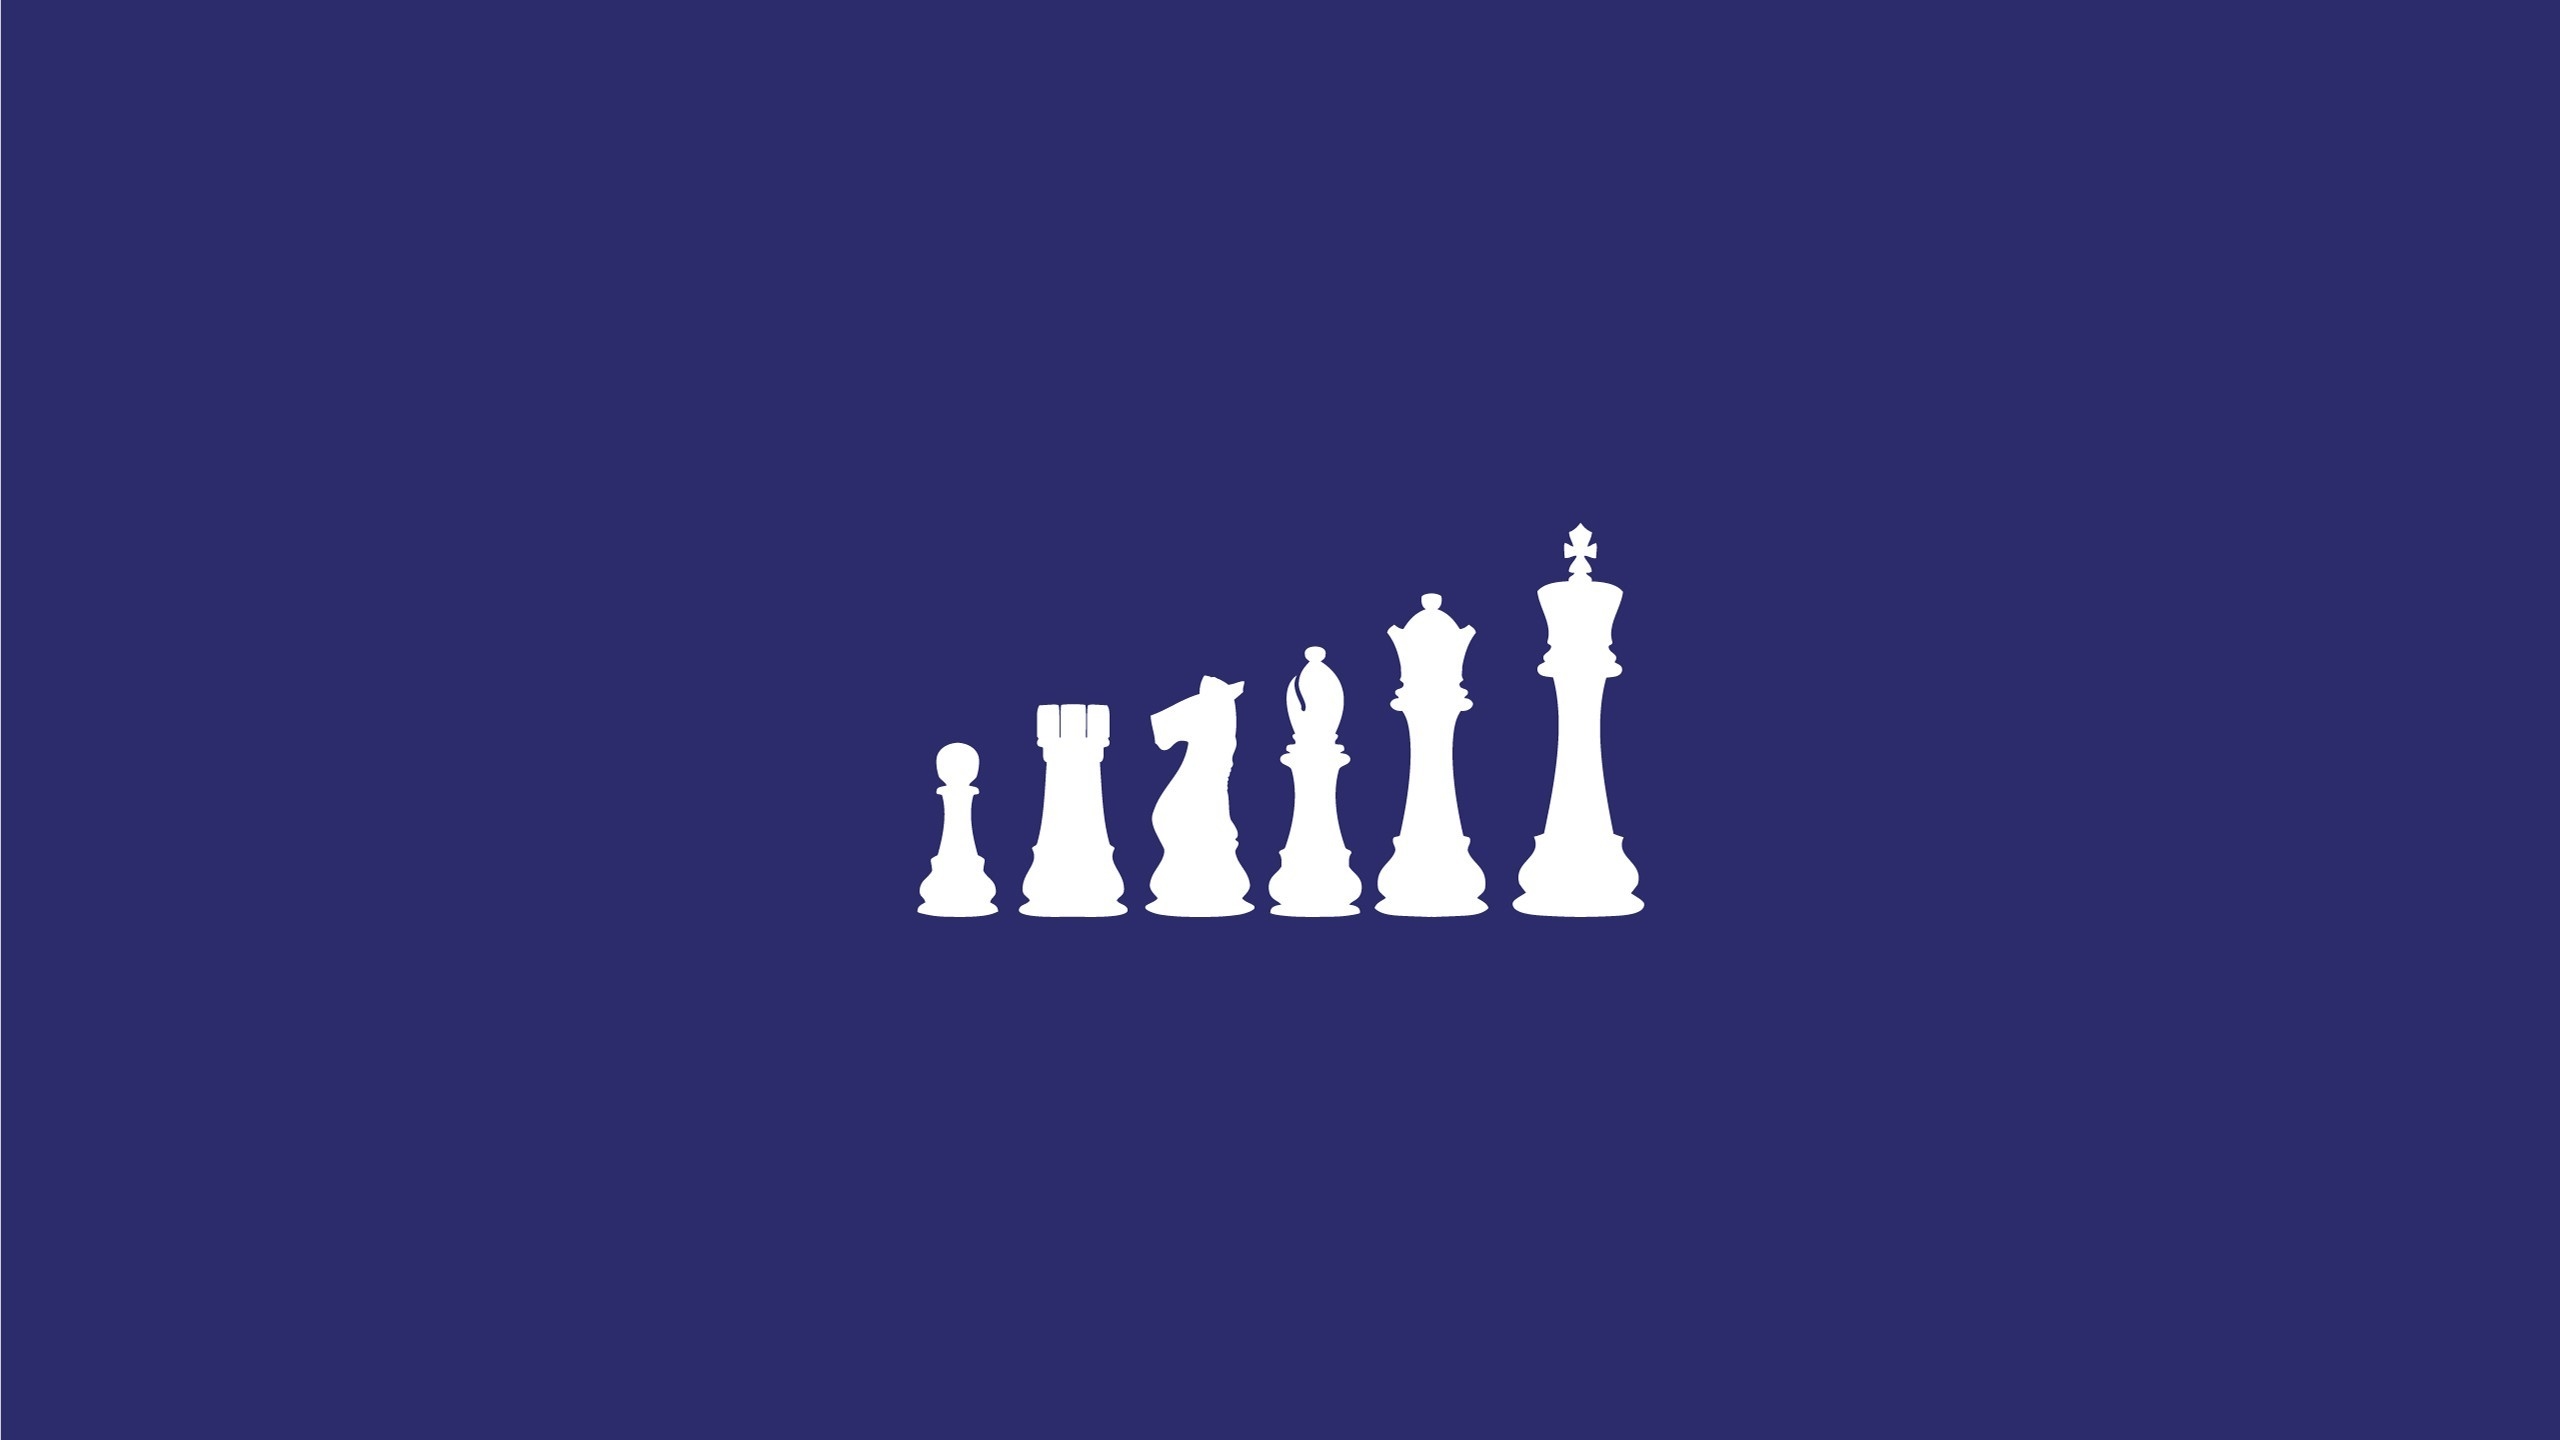 Chess Figures for 2560x1440 HDTV resolution